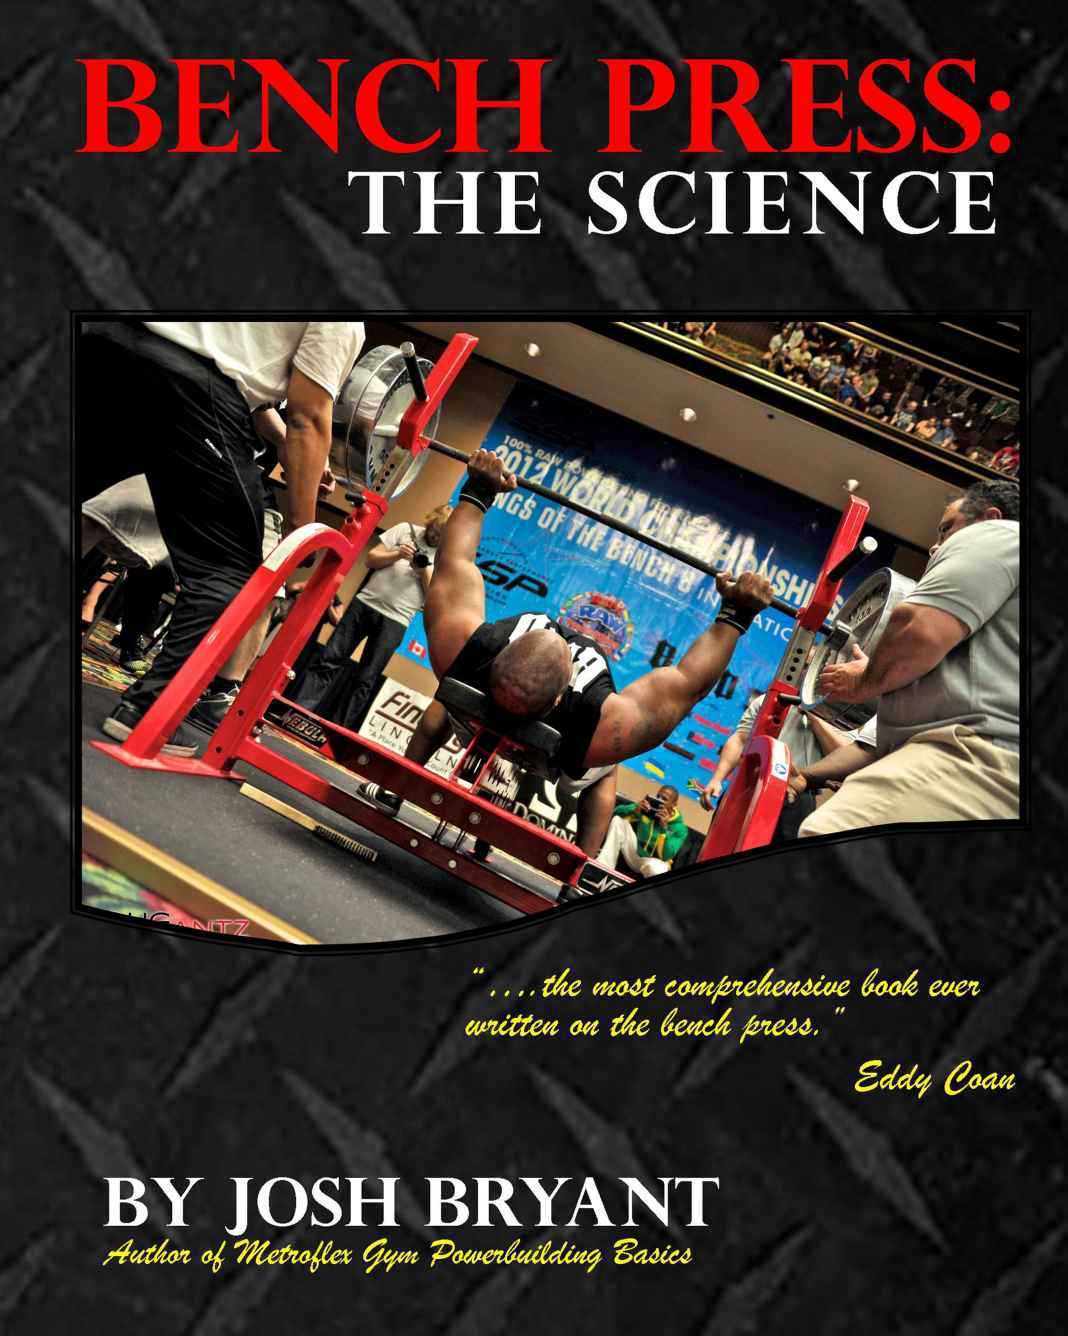 Bench Press: The Science